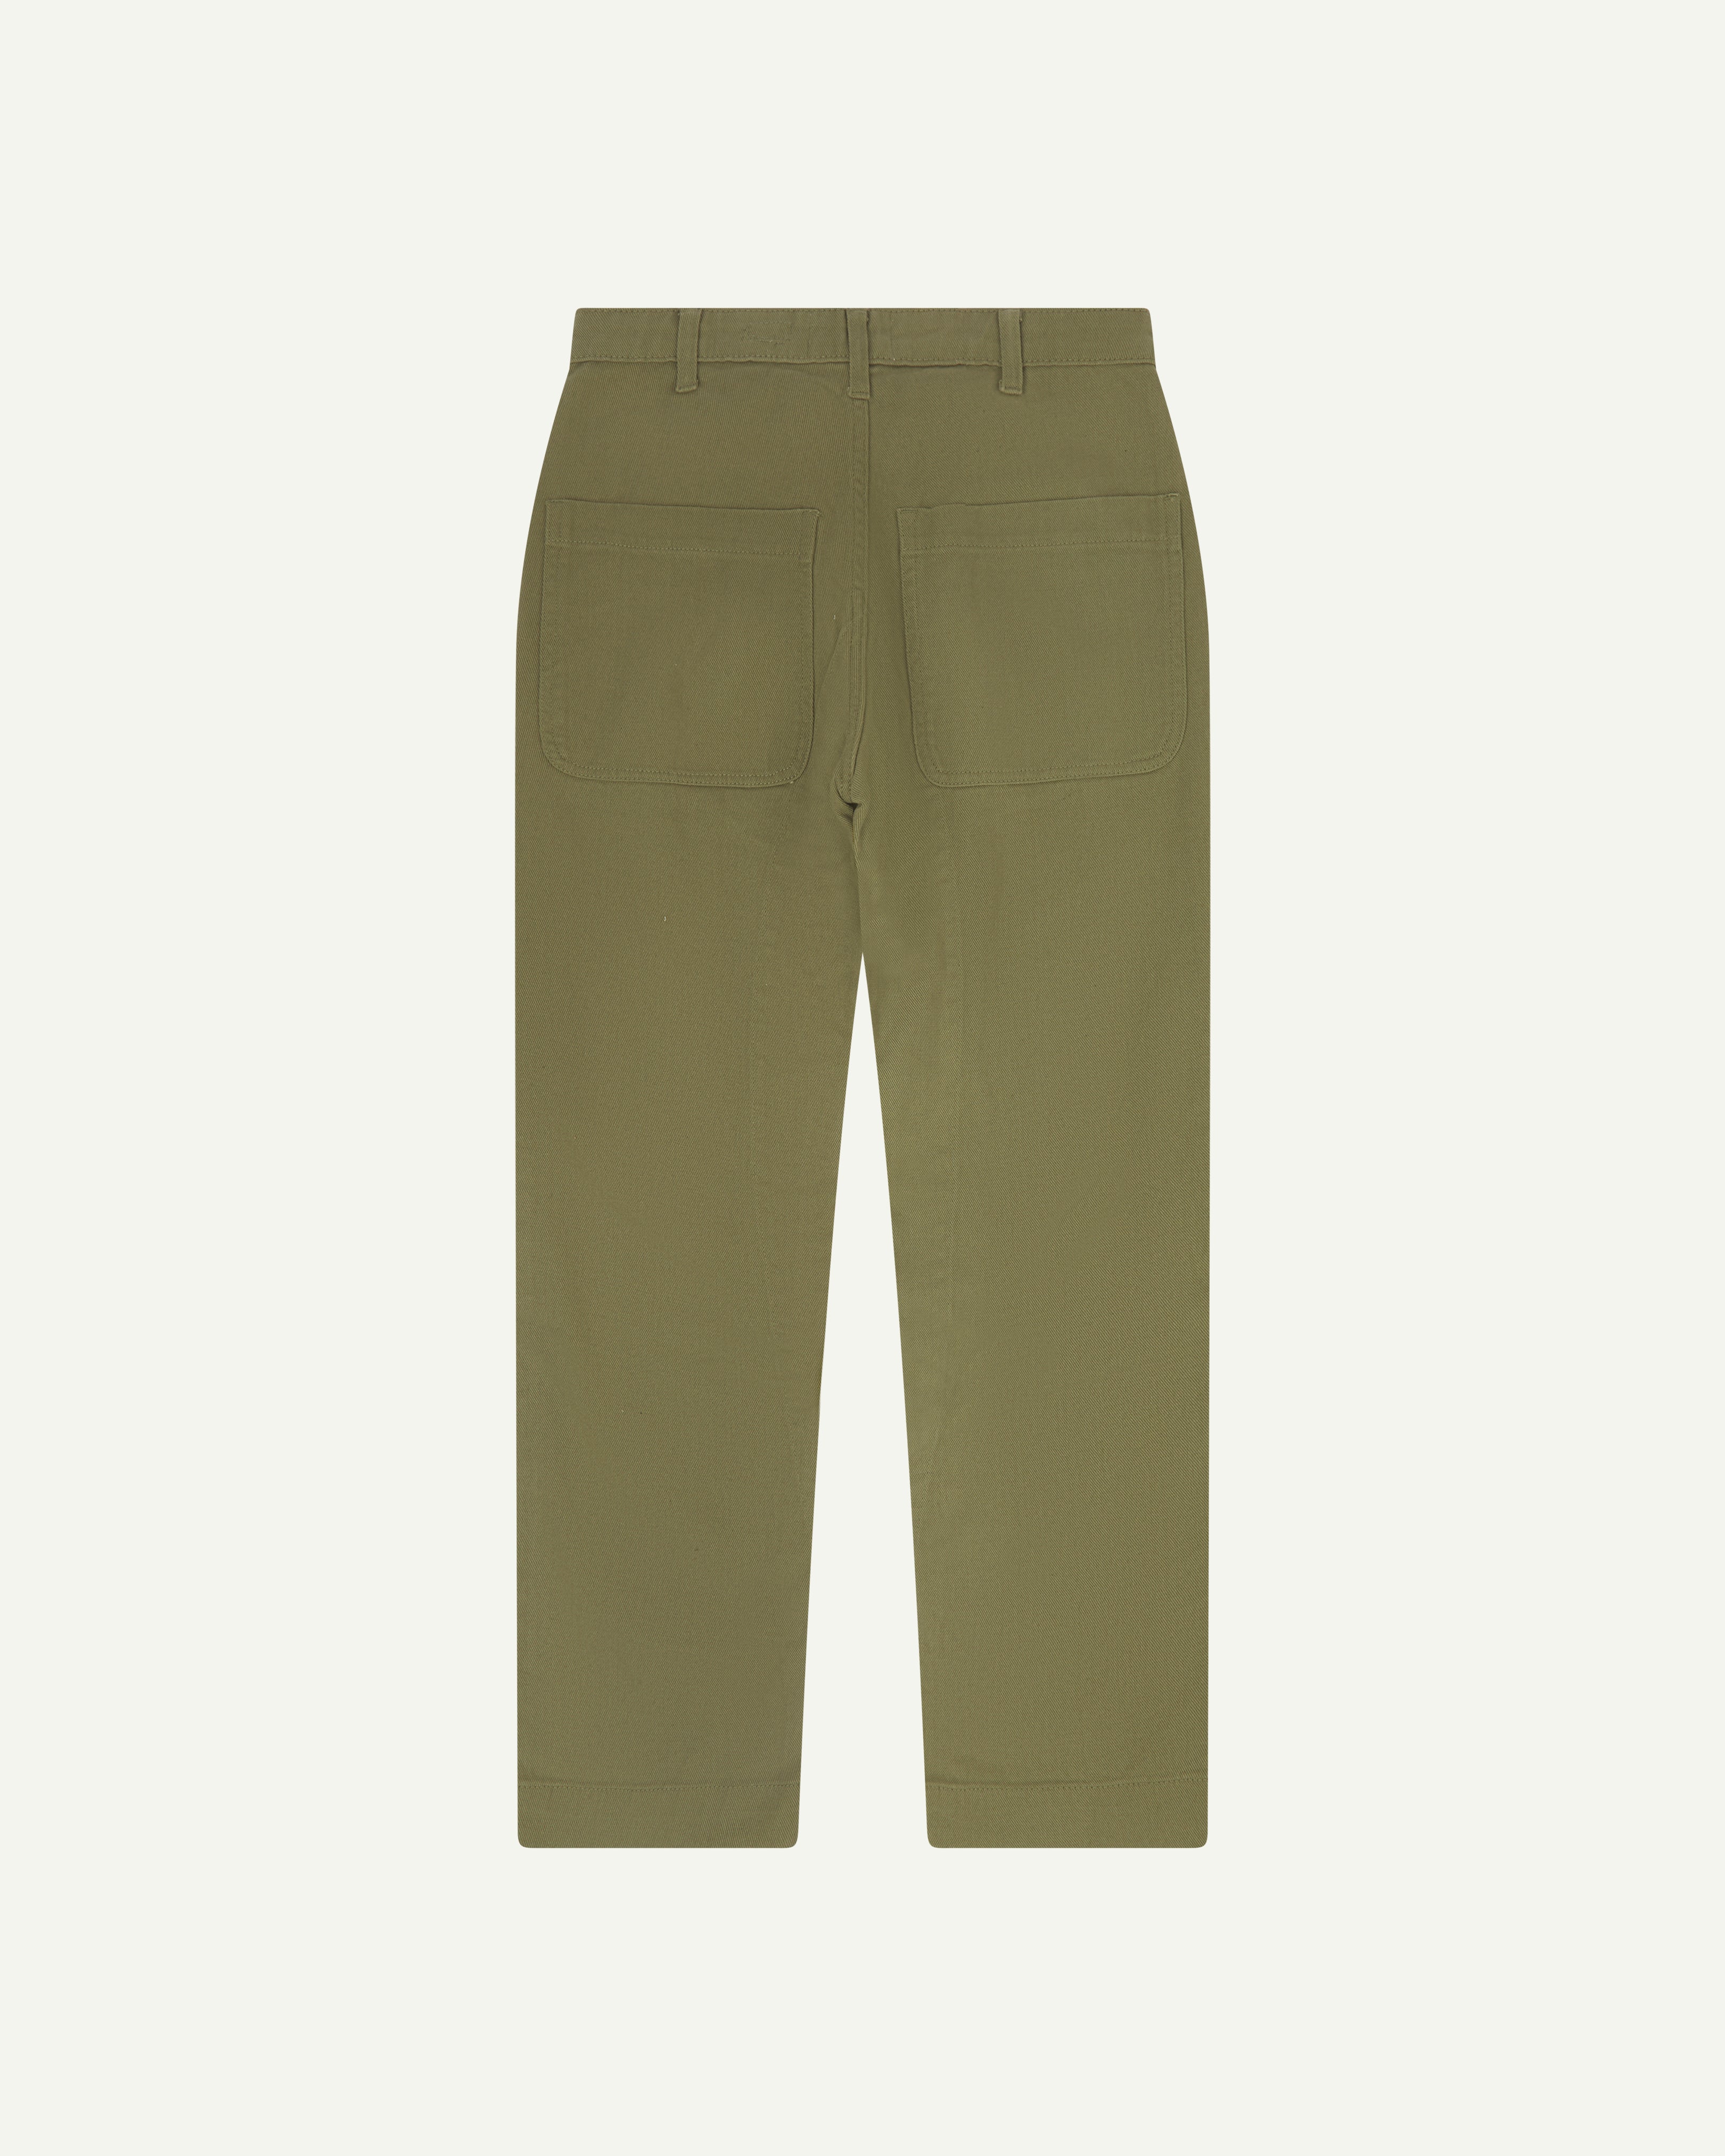 Back view of uskees cotton drill 'commuter' trousers for men in moss green showing back pockets